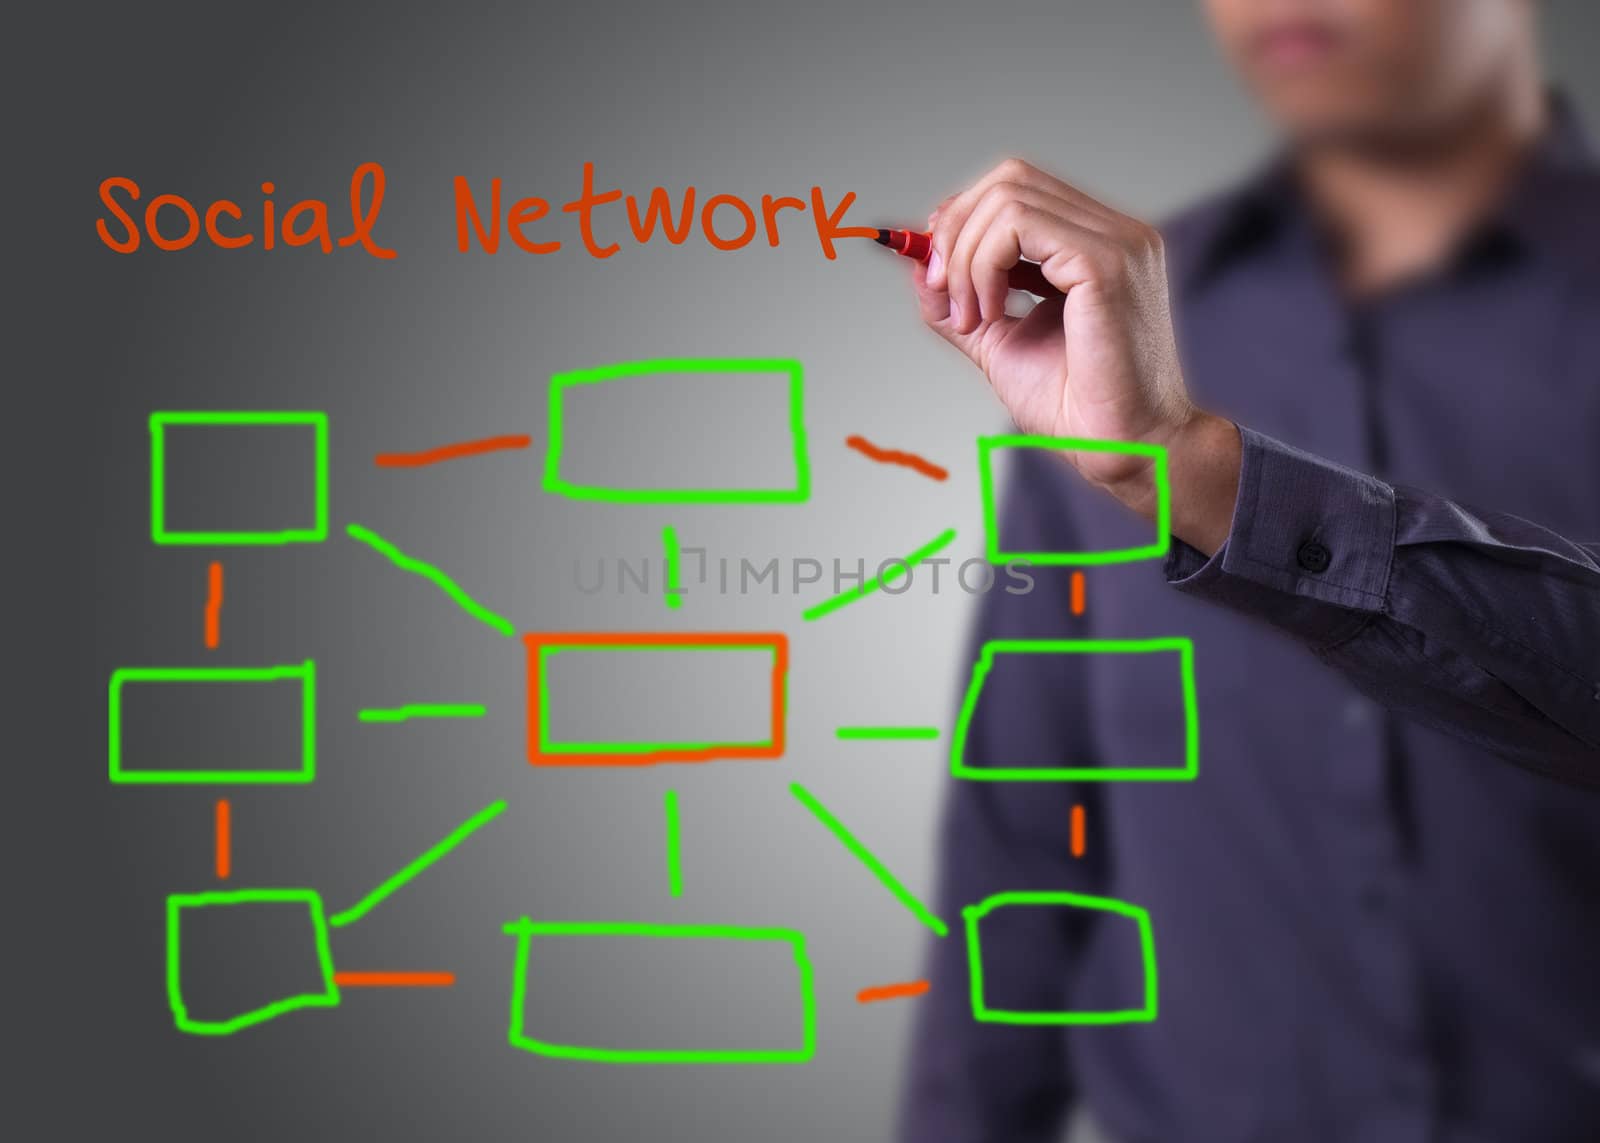 drawing social network structure in a whiteboard  by duron123